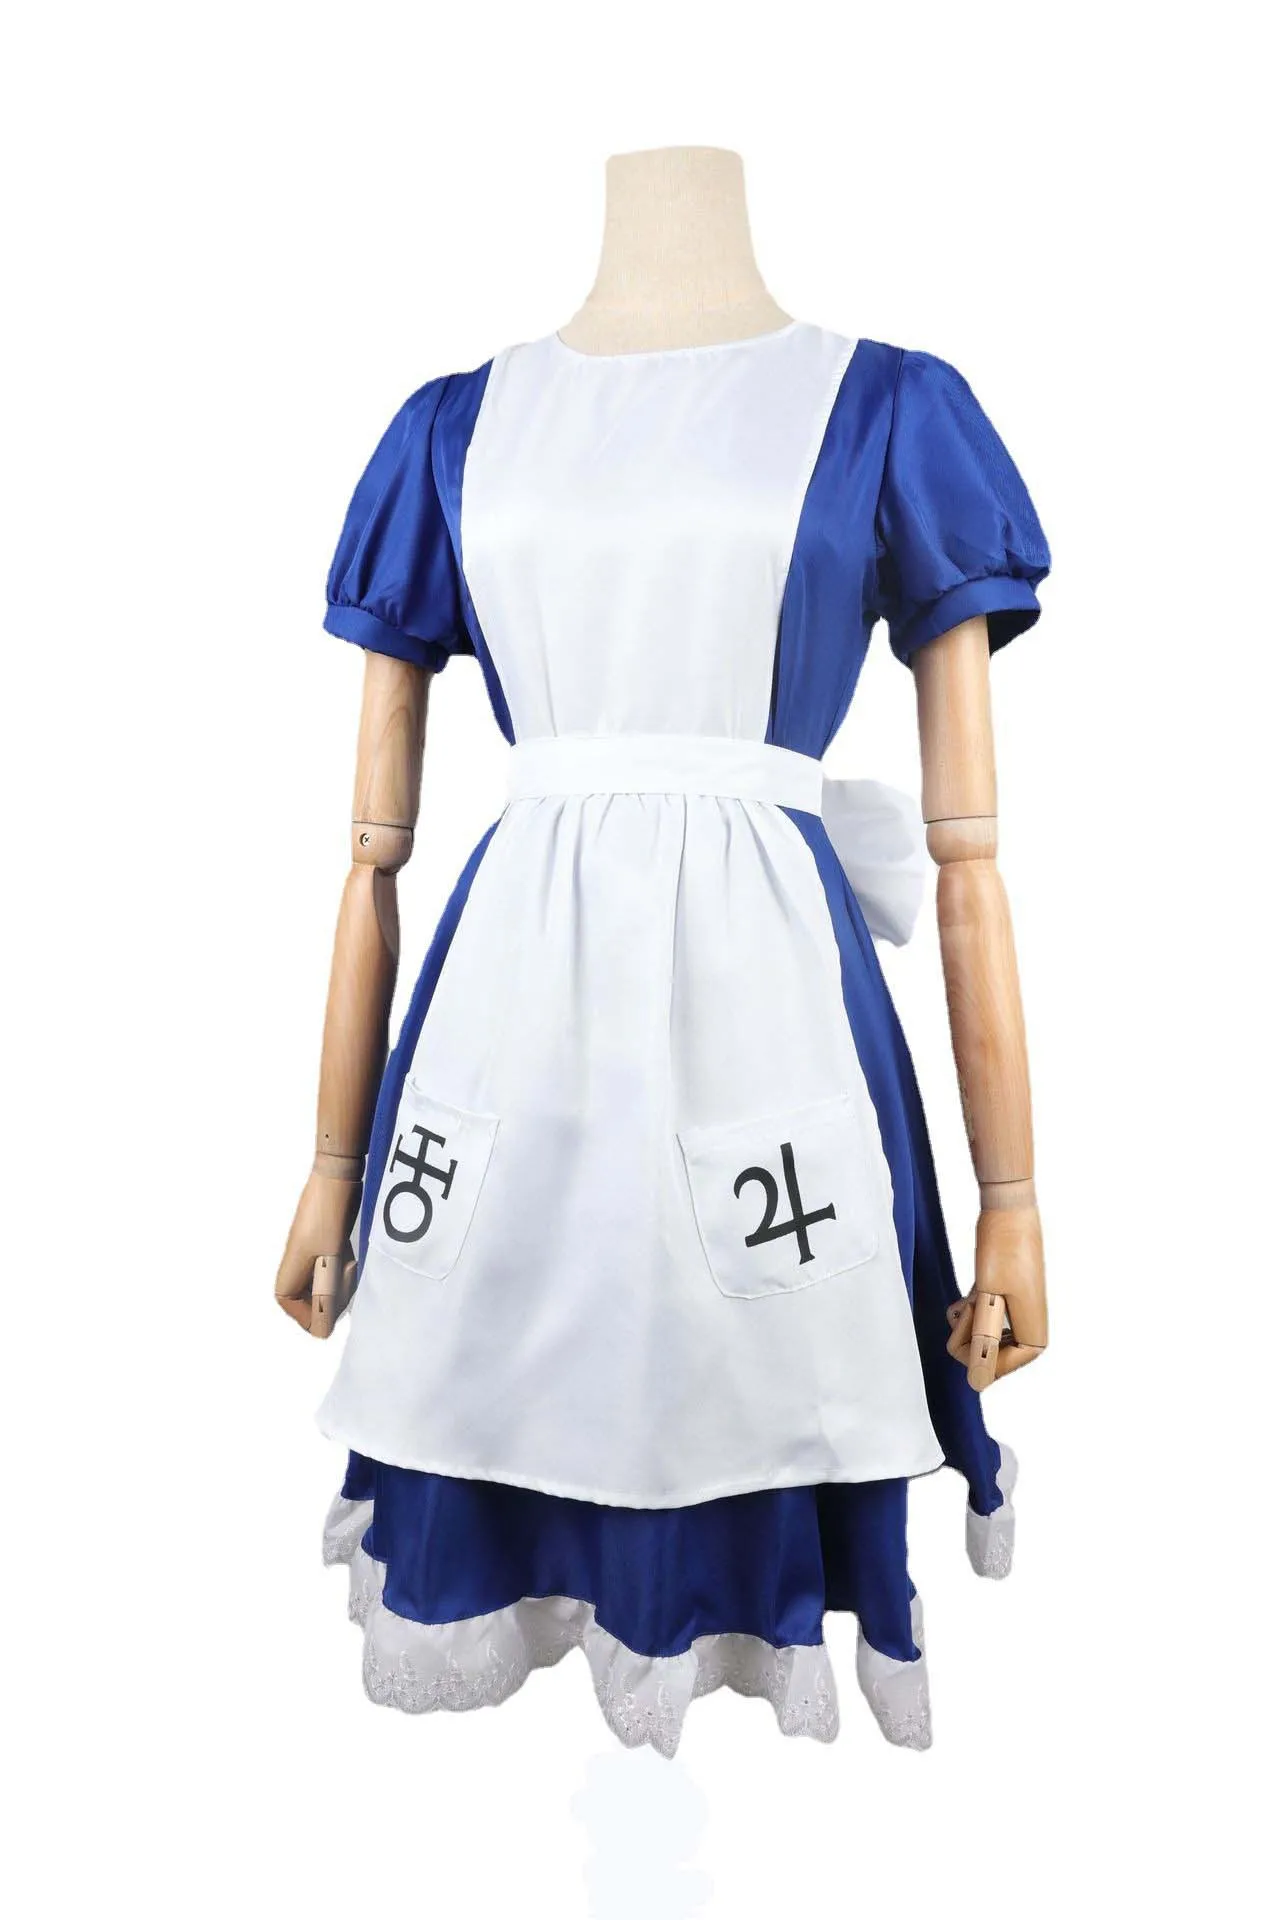 New Alice Madness Returns Cosplay Costume Alice Steam Dress Outfit  Halloween Party Costumes for Women Free Shipping - AliExpress